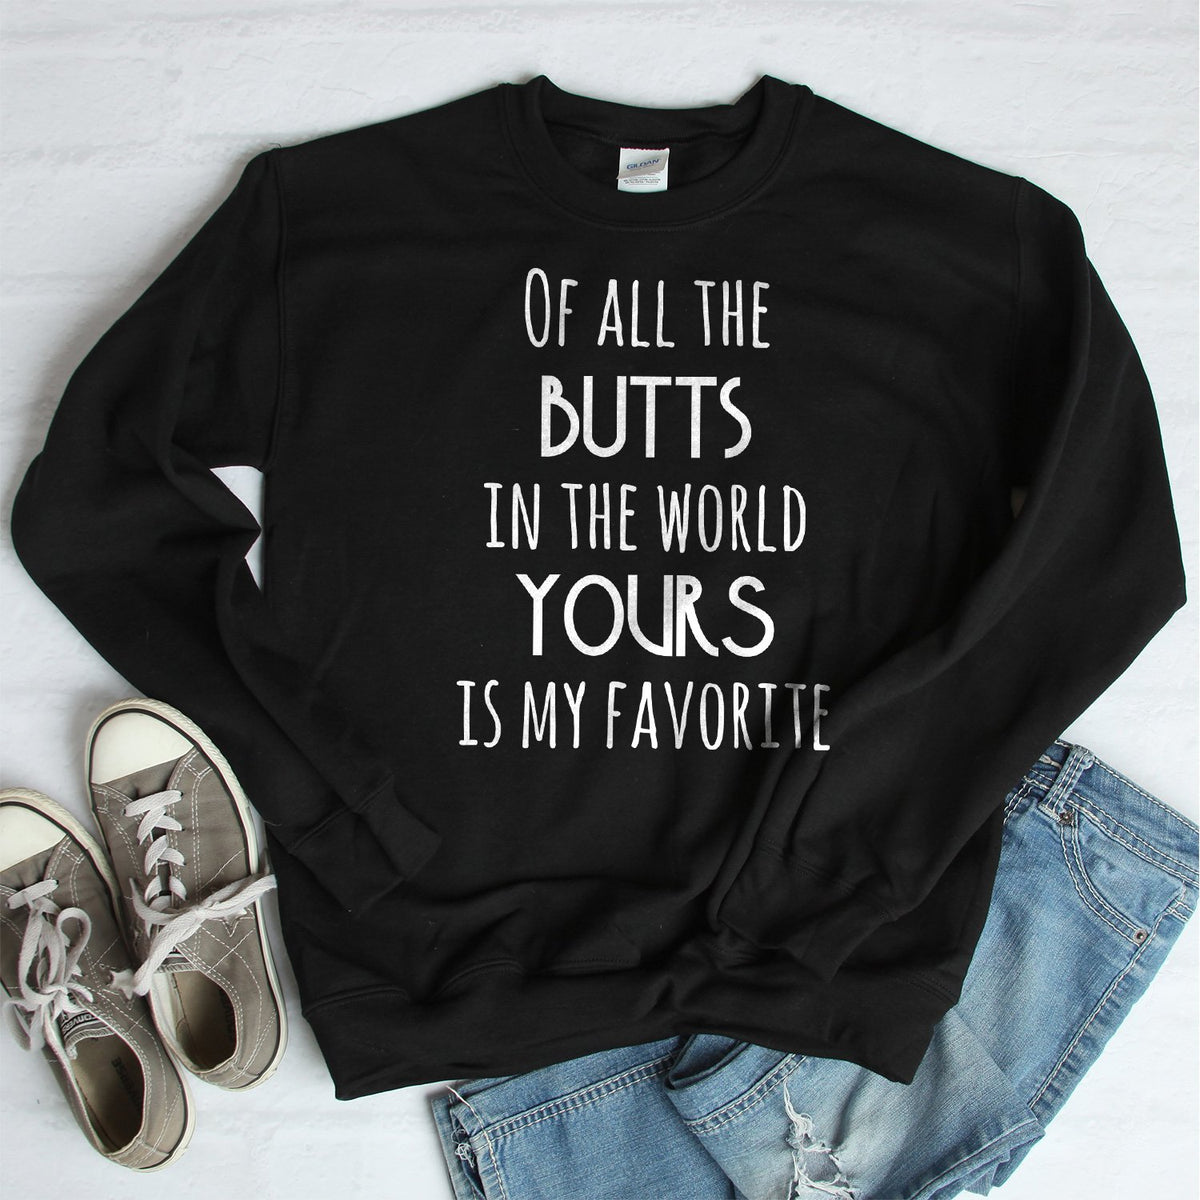 Off All the Butts in the World Yours is My Favorite - Long Sleeve Heavy Crewneck Sweatshirt